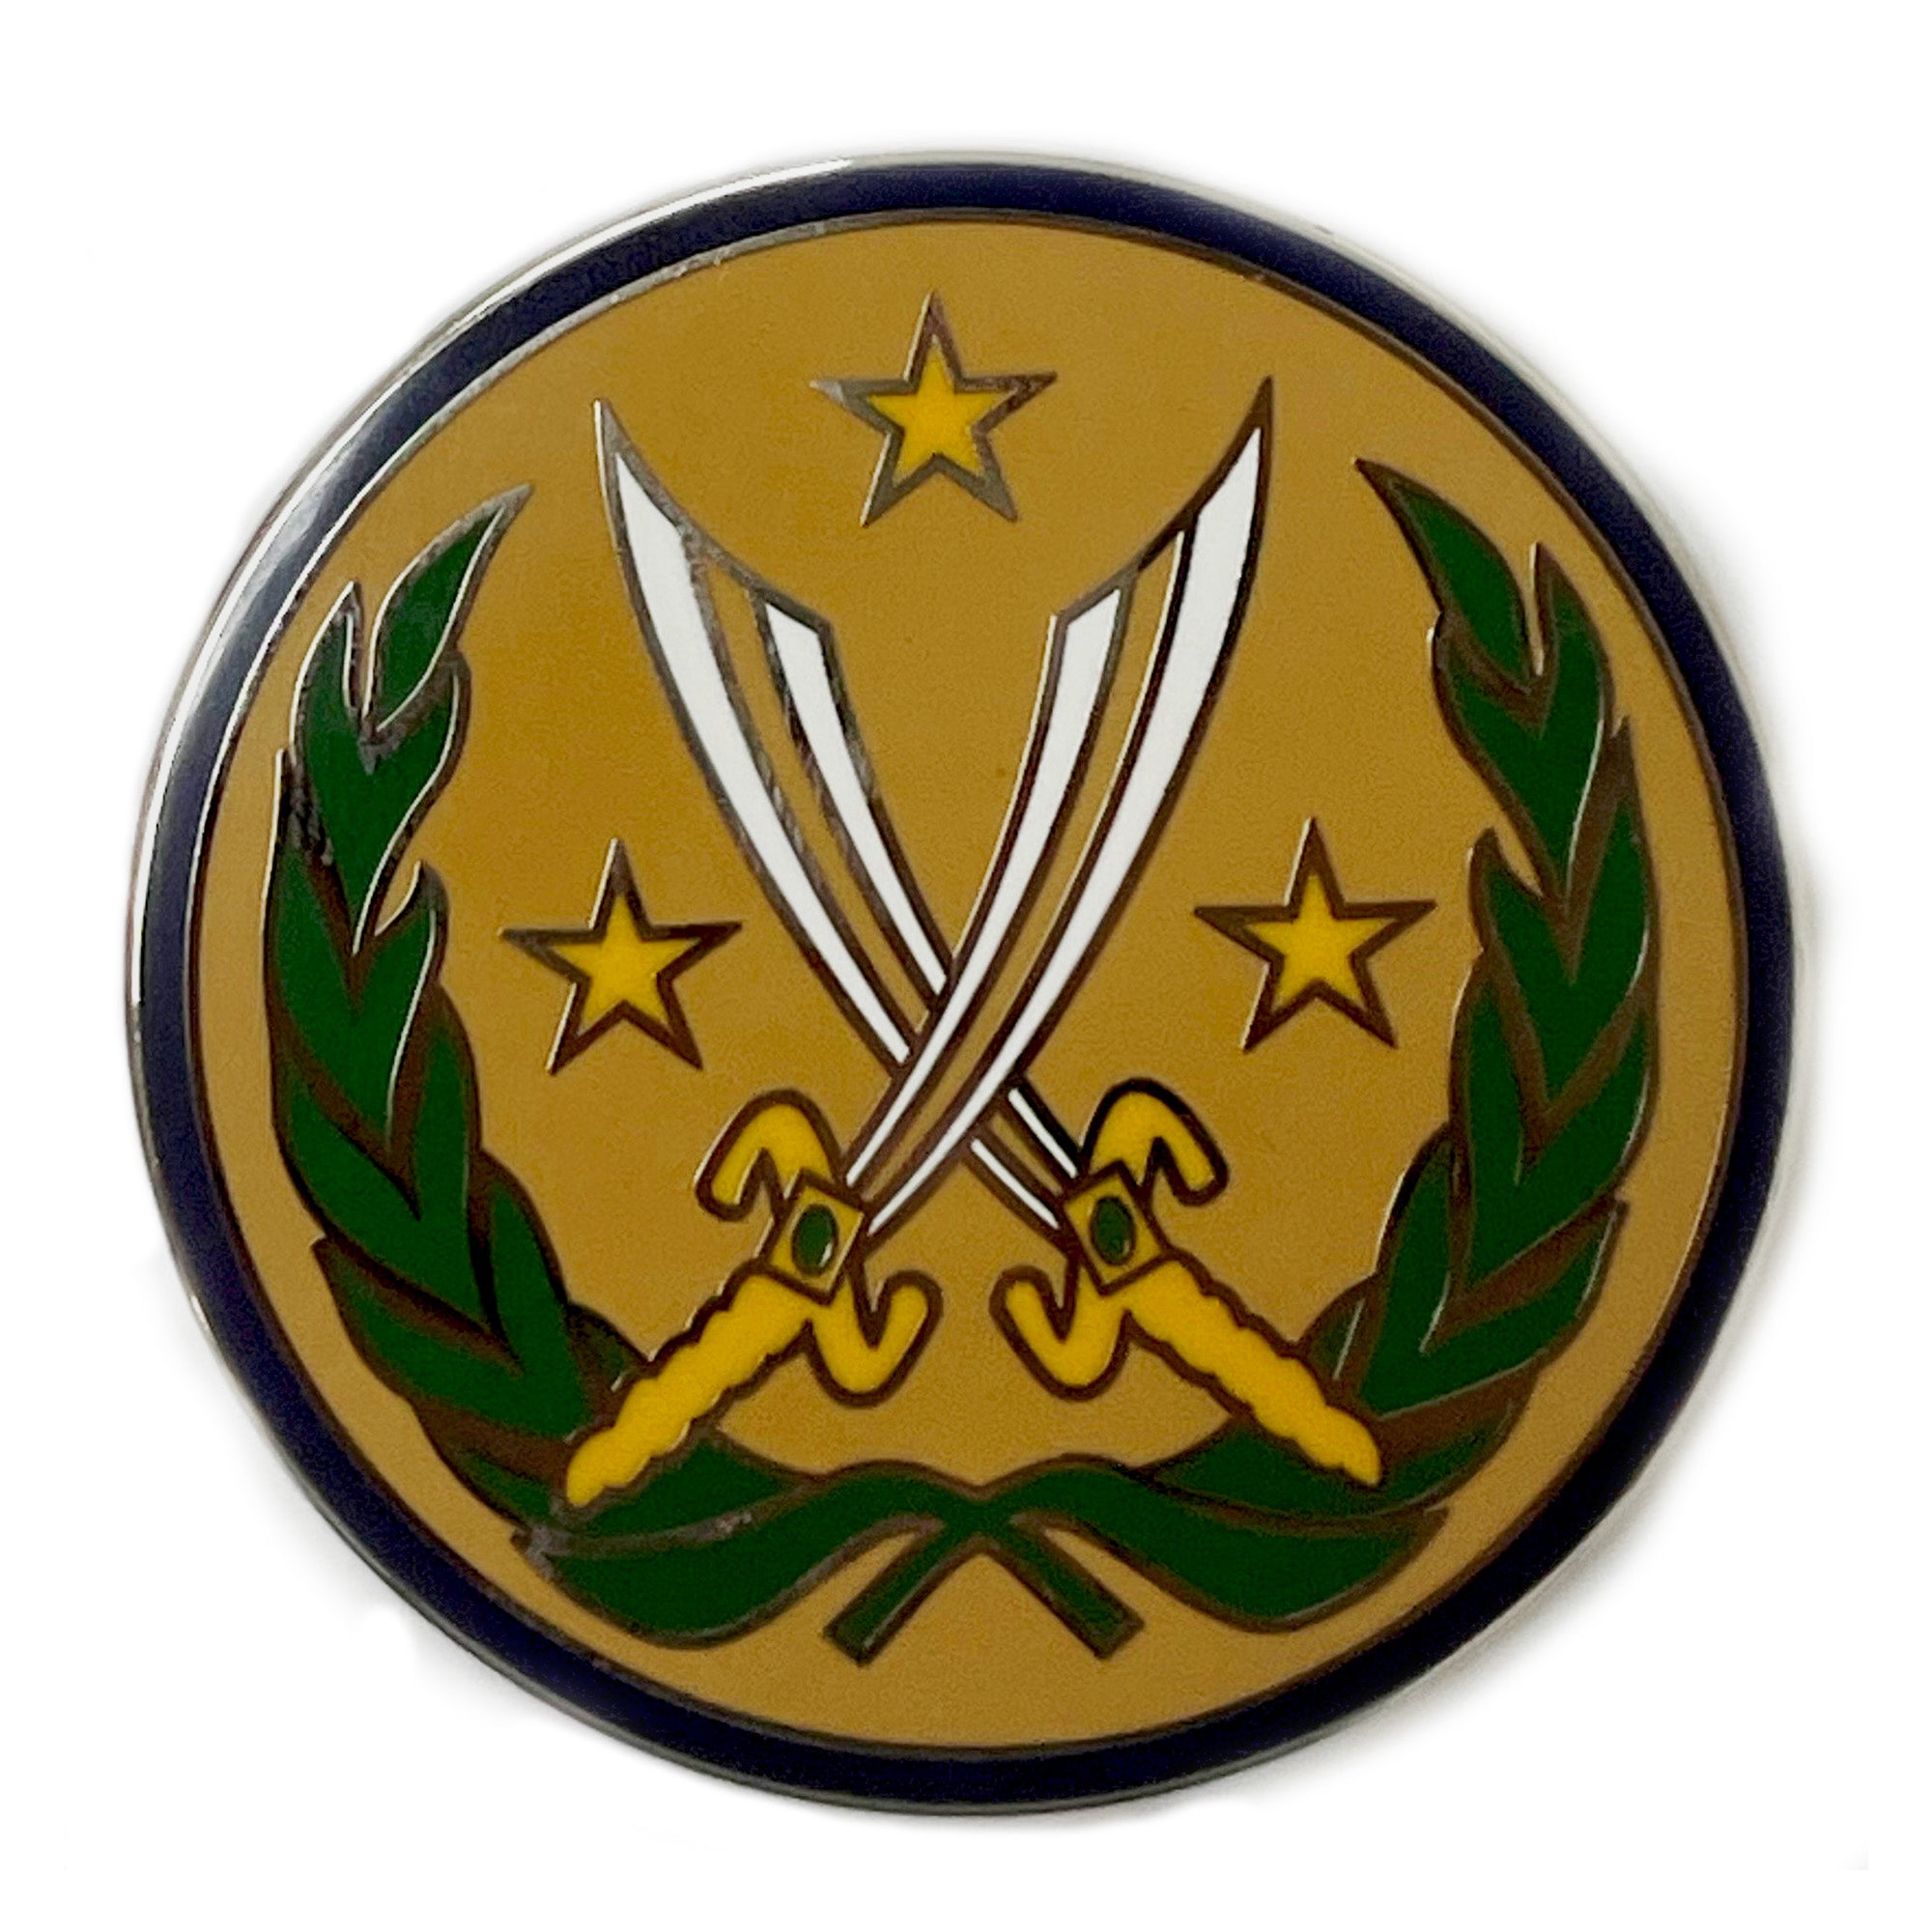 Army Element Combined Joint Task Force Operation Inherent Resolve CSIB (each).